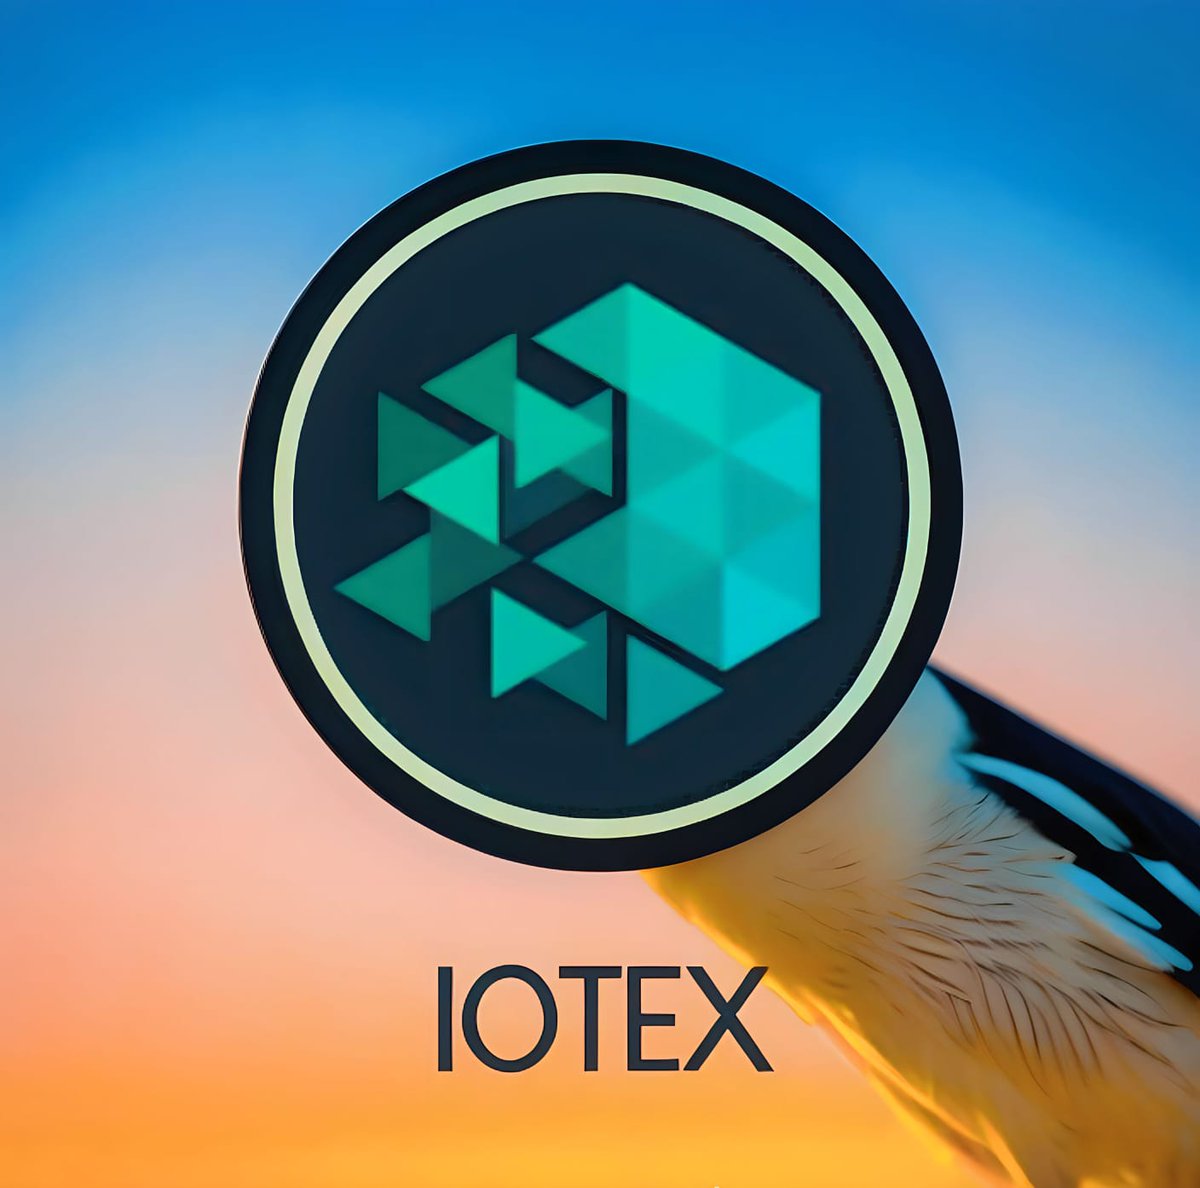 Tweet 1: In an era of digital transformation, @iotex_io is leading the way with its innovative blockchain technology. IoTeX's mission is to empower the future by enabling secure, private, and scalable interactions between smart devices and the blockchain. #IoTeX #DePIN